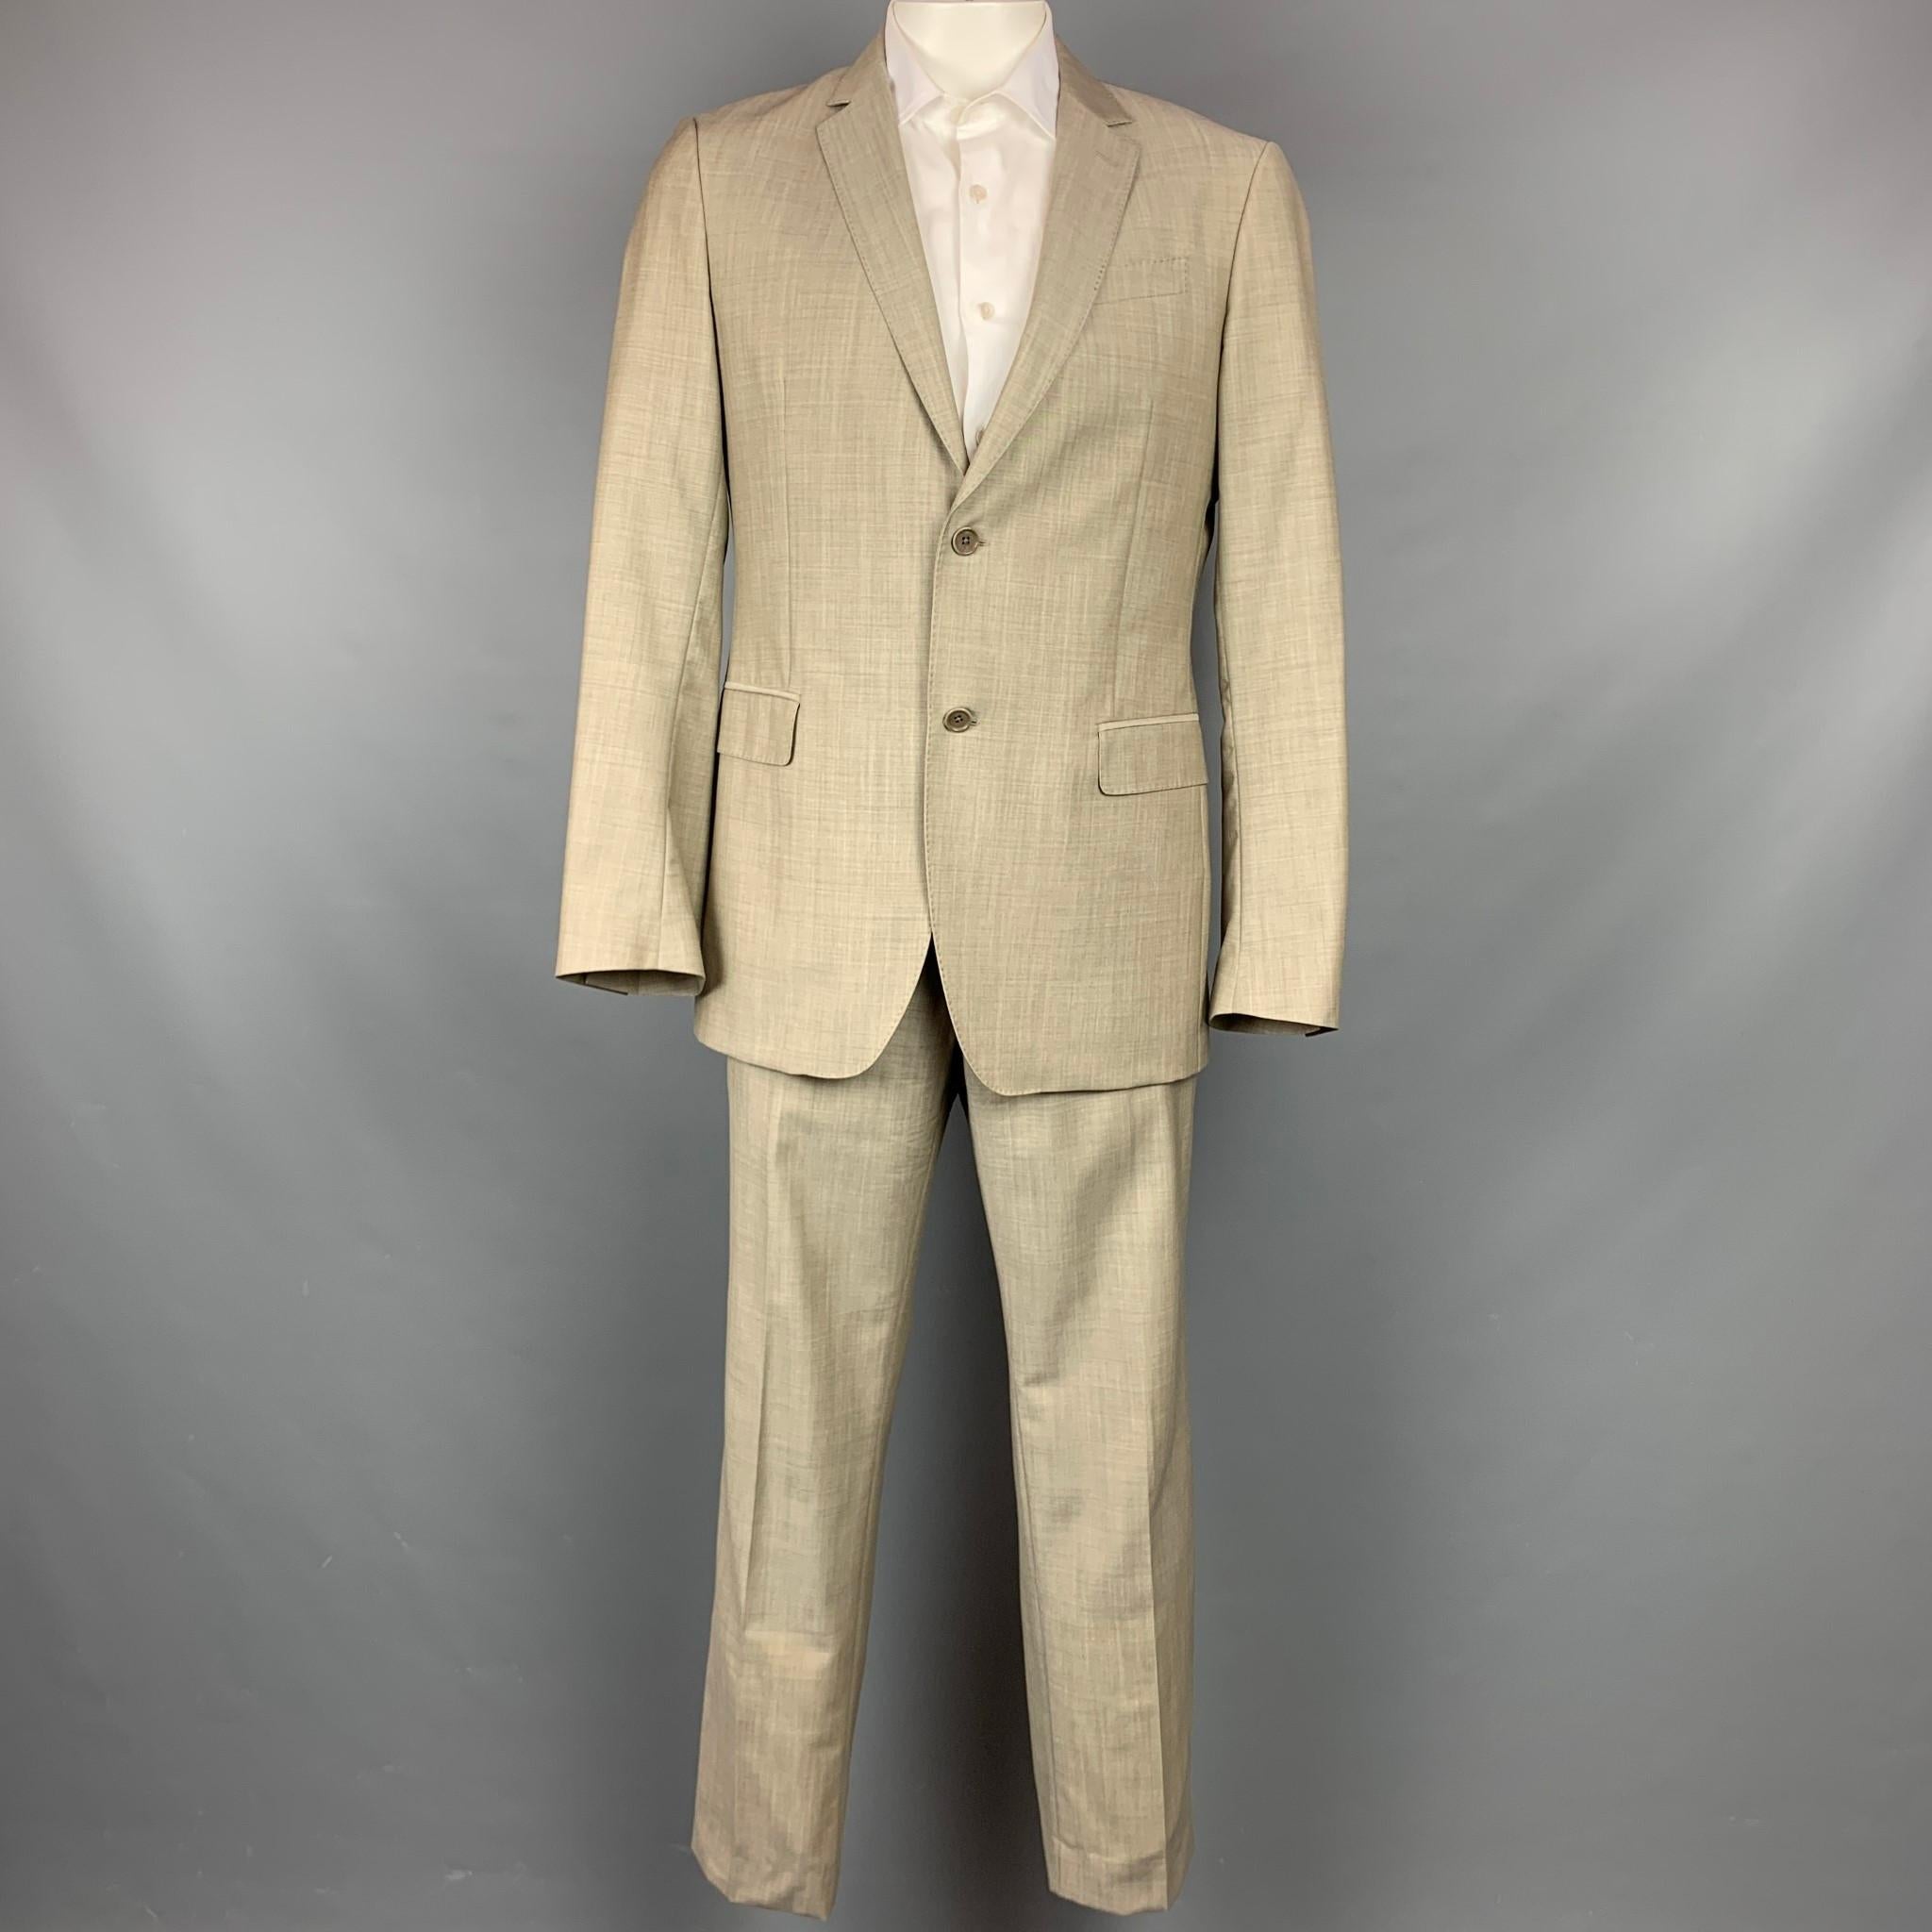 JOHN VARVATOS suit comes in a oatmeal heather wool / mohair with a full liner and includes a single breasted, two button sport coat with a notch lapel and matching flat front trousers. Made in Italy.

Very Good Pre-Owned Condition.
Marked: Jacket: